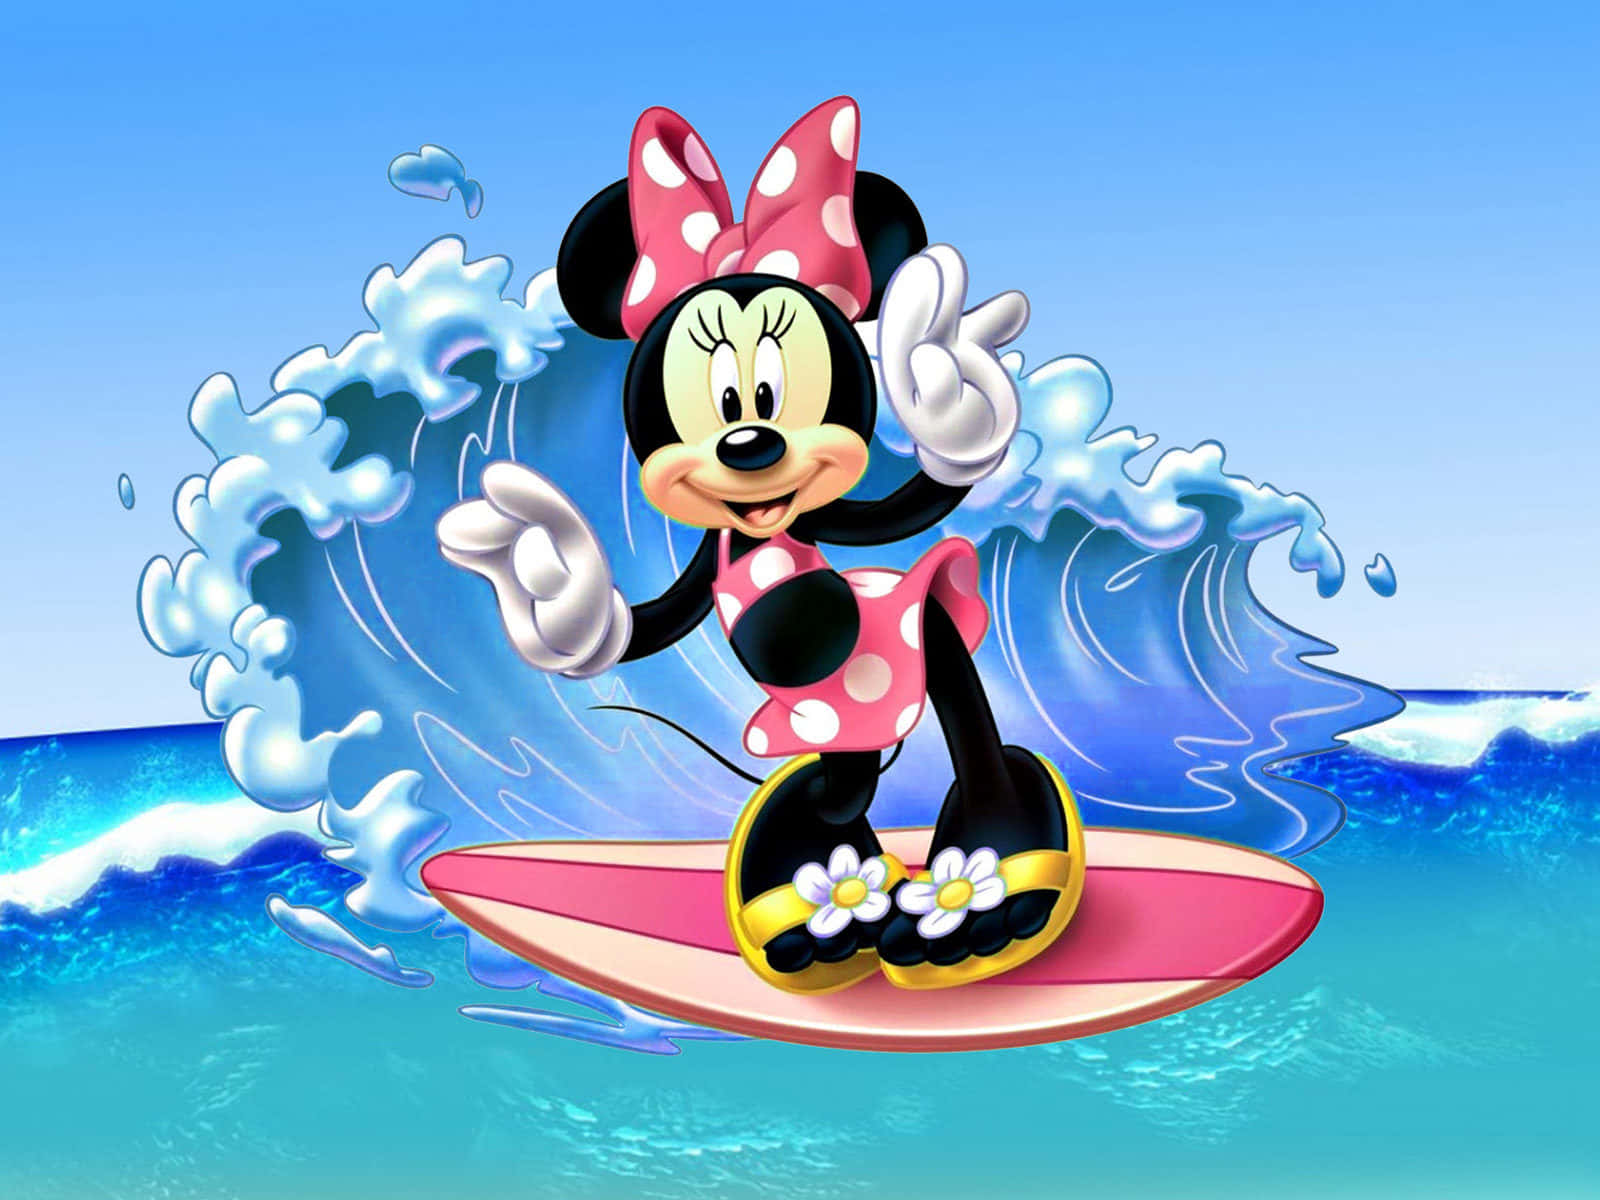 Minnie Mouse fills the sky with laughter and joy!